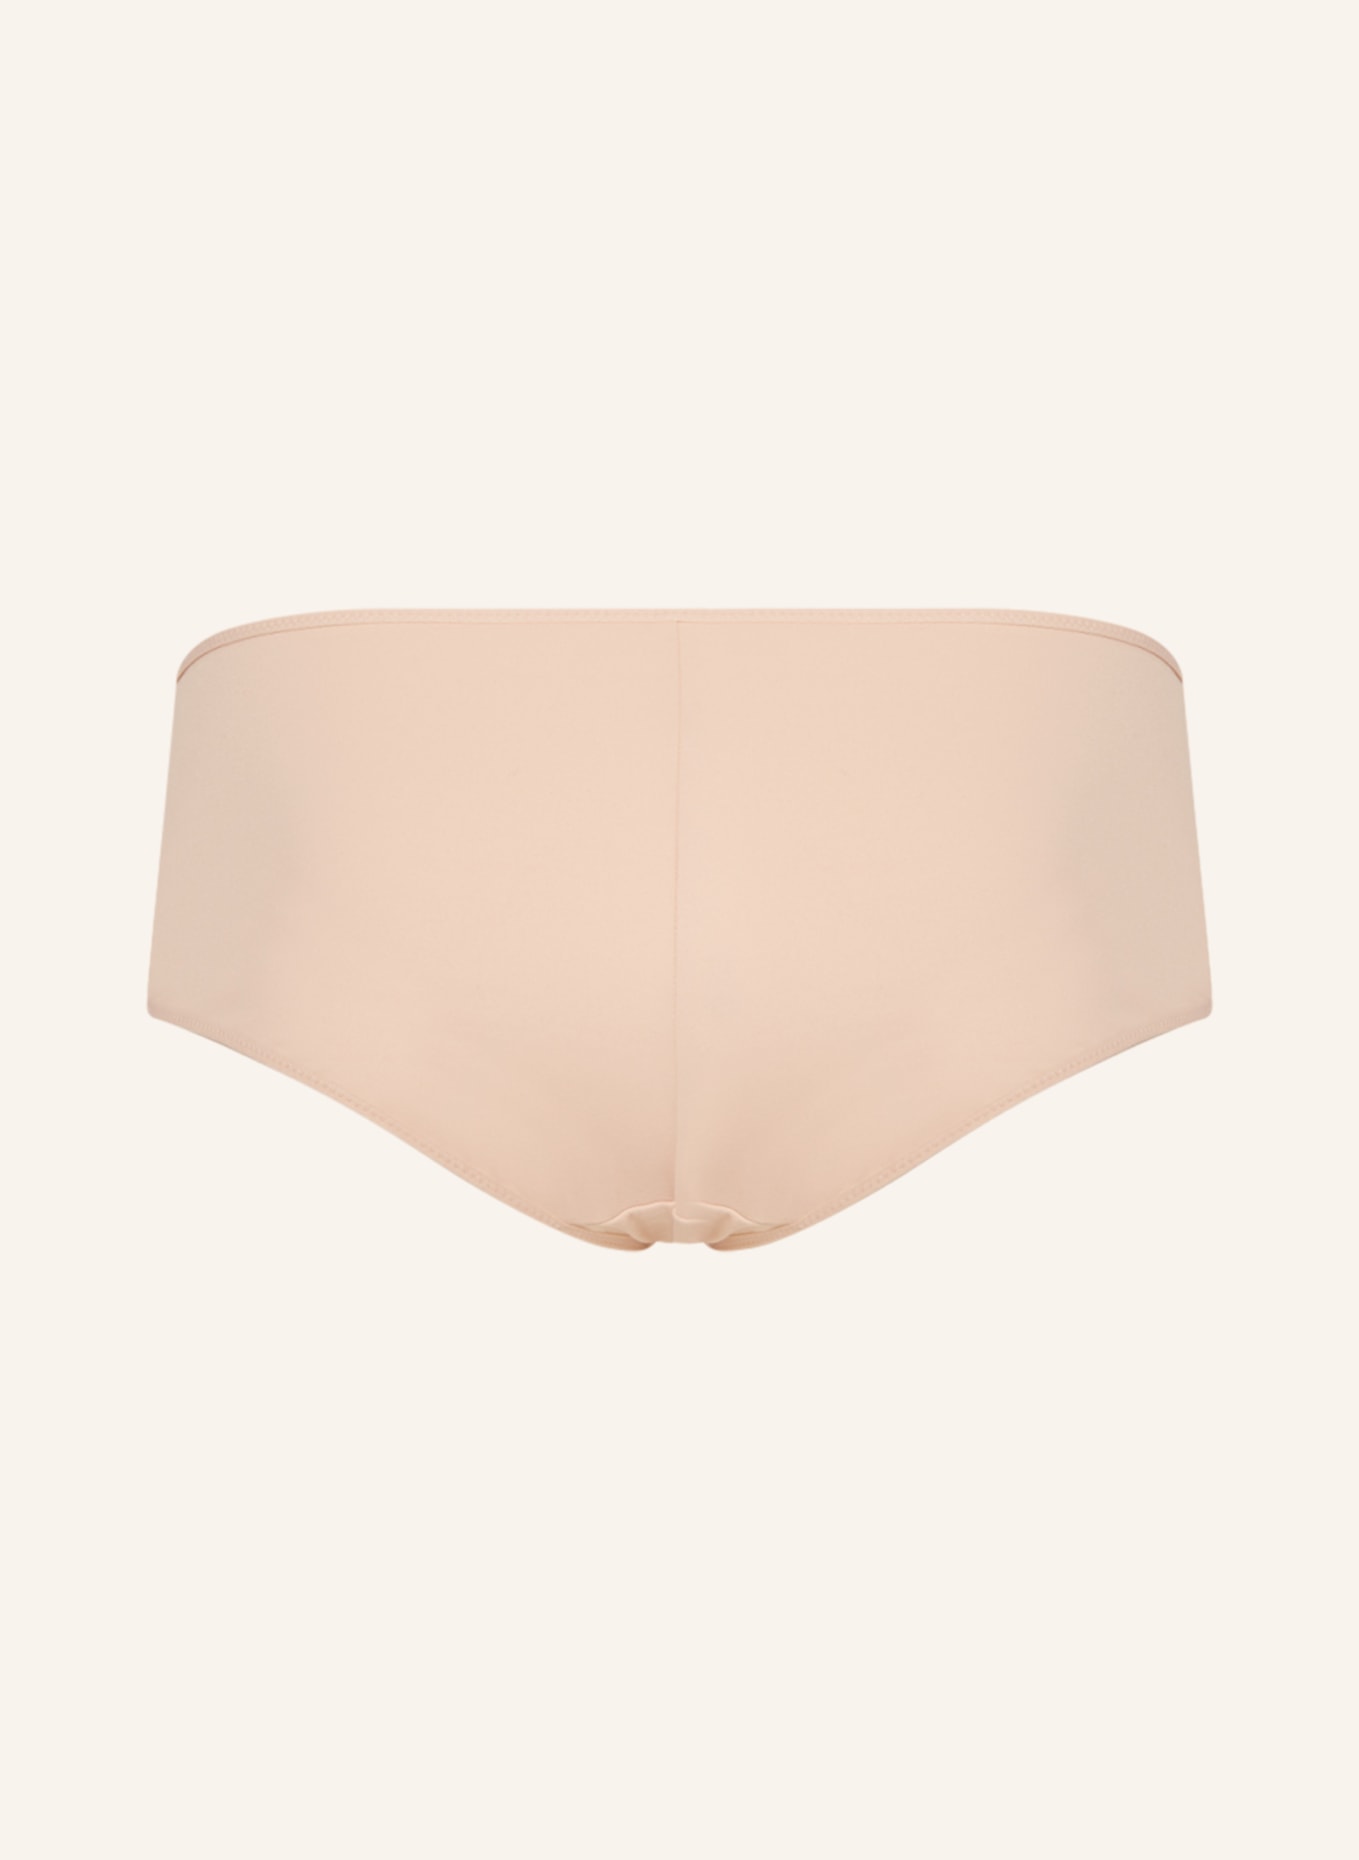 CHANTELLE Panty FLORAL TOUCH, Farbe: NUDE (Bild 2)